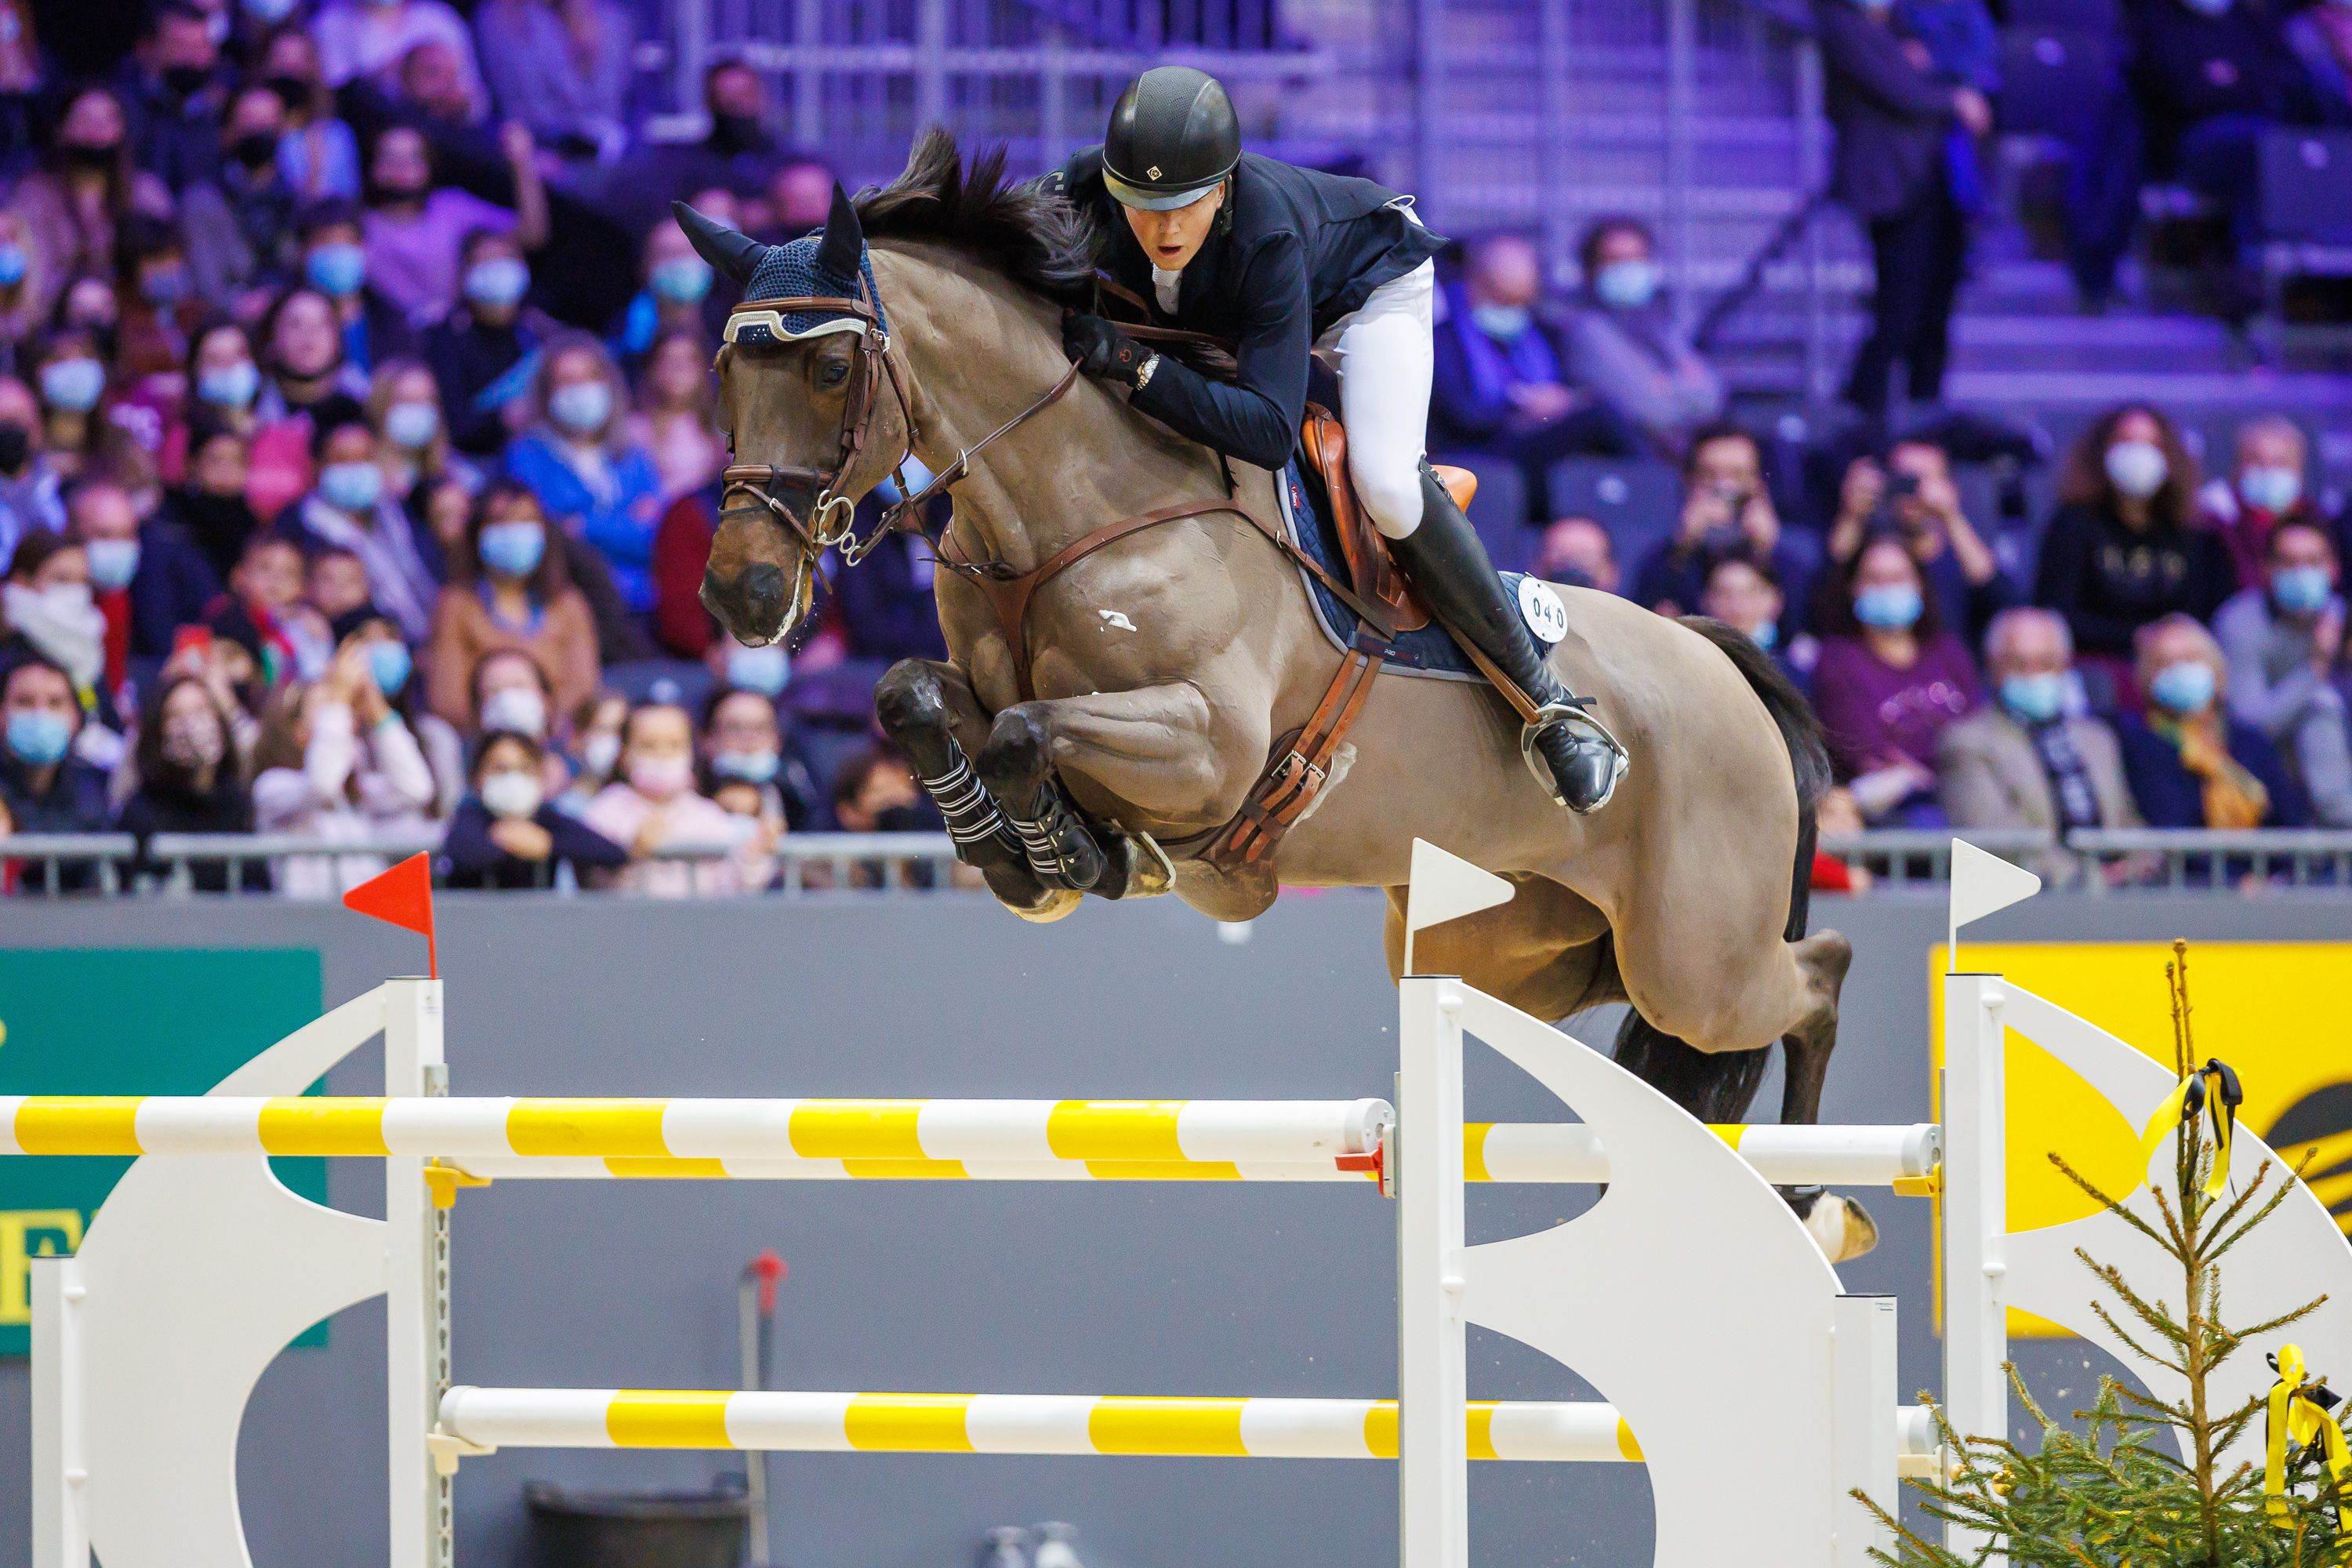 Harry Charles on a winning streak with another victory in the CSI5* 1.55m class of London